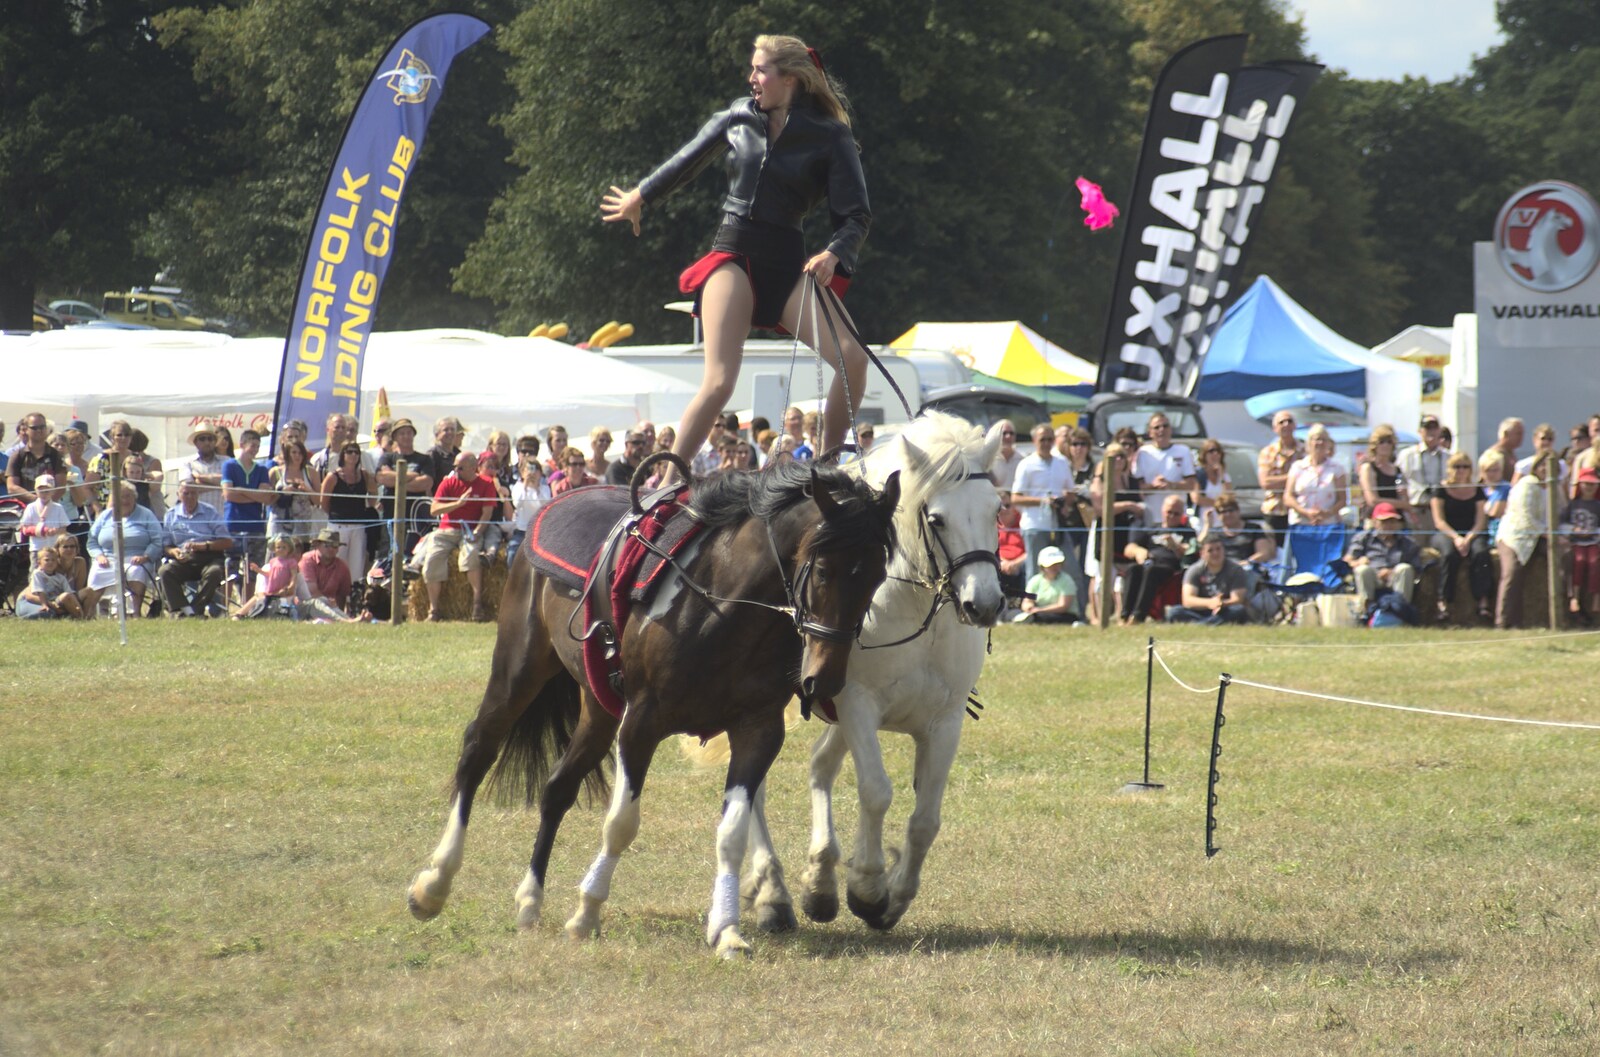 Roman riding around the show ring from The Eye Show and the Red Arrows, Palgrave, Suffolk - 31st August 2009